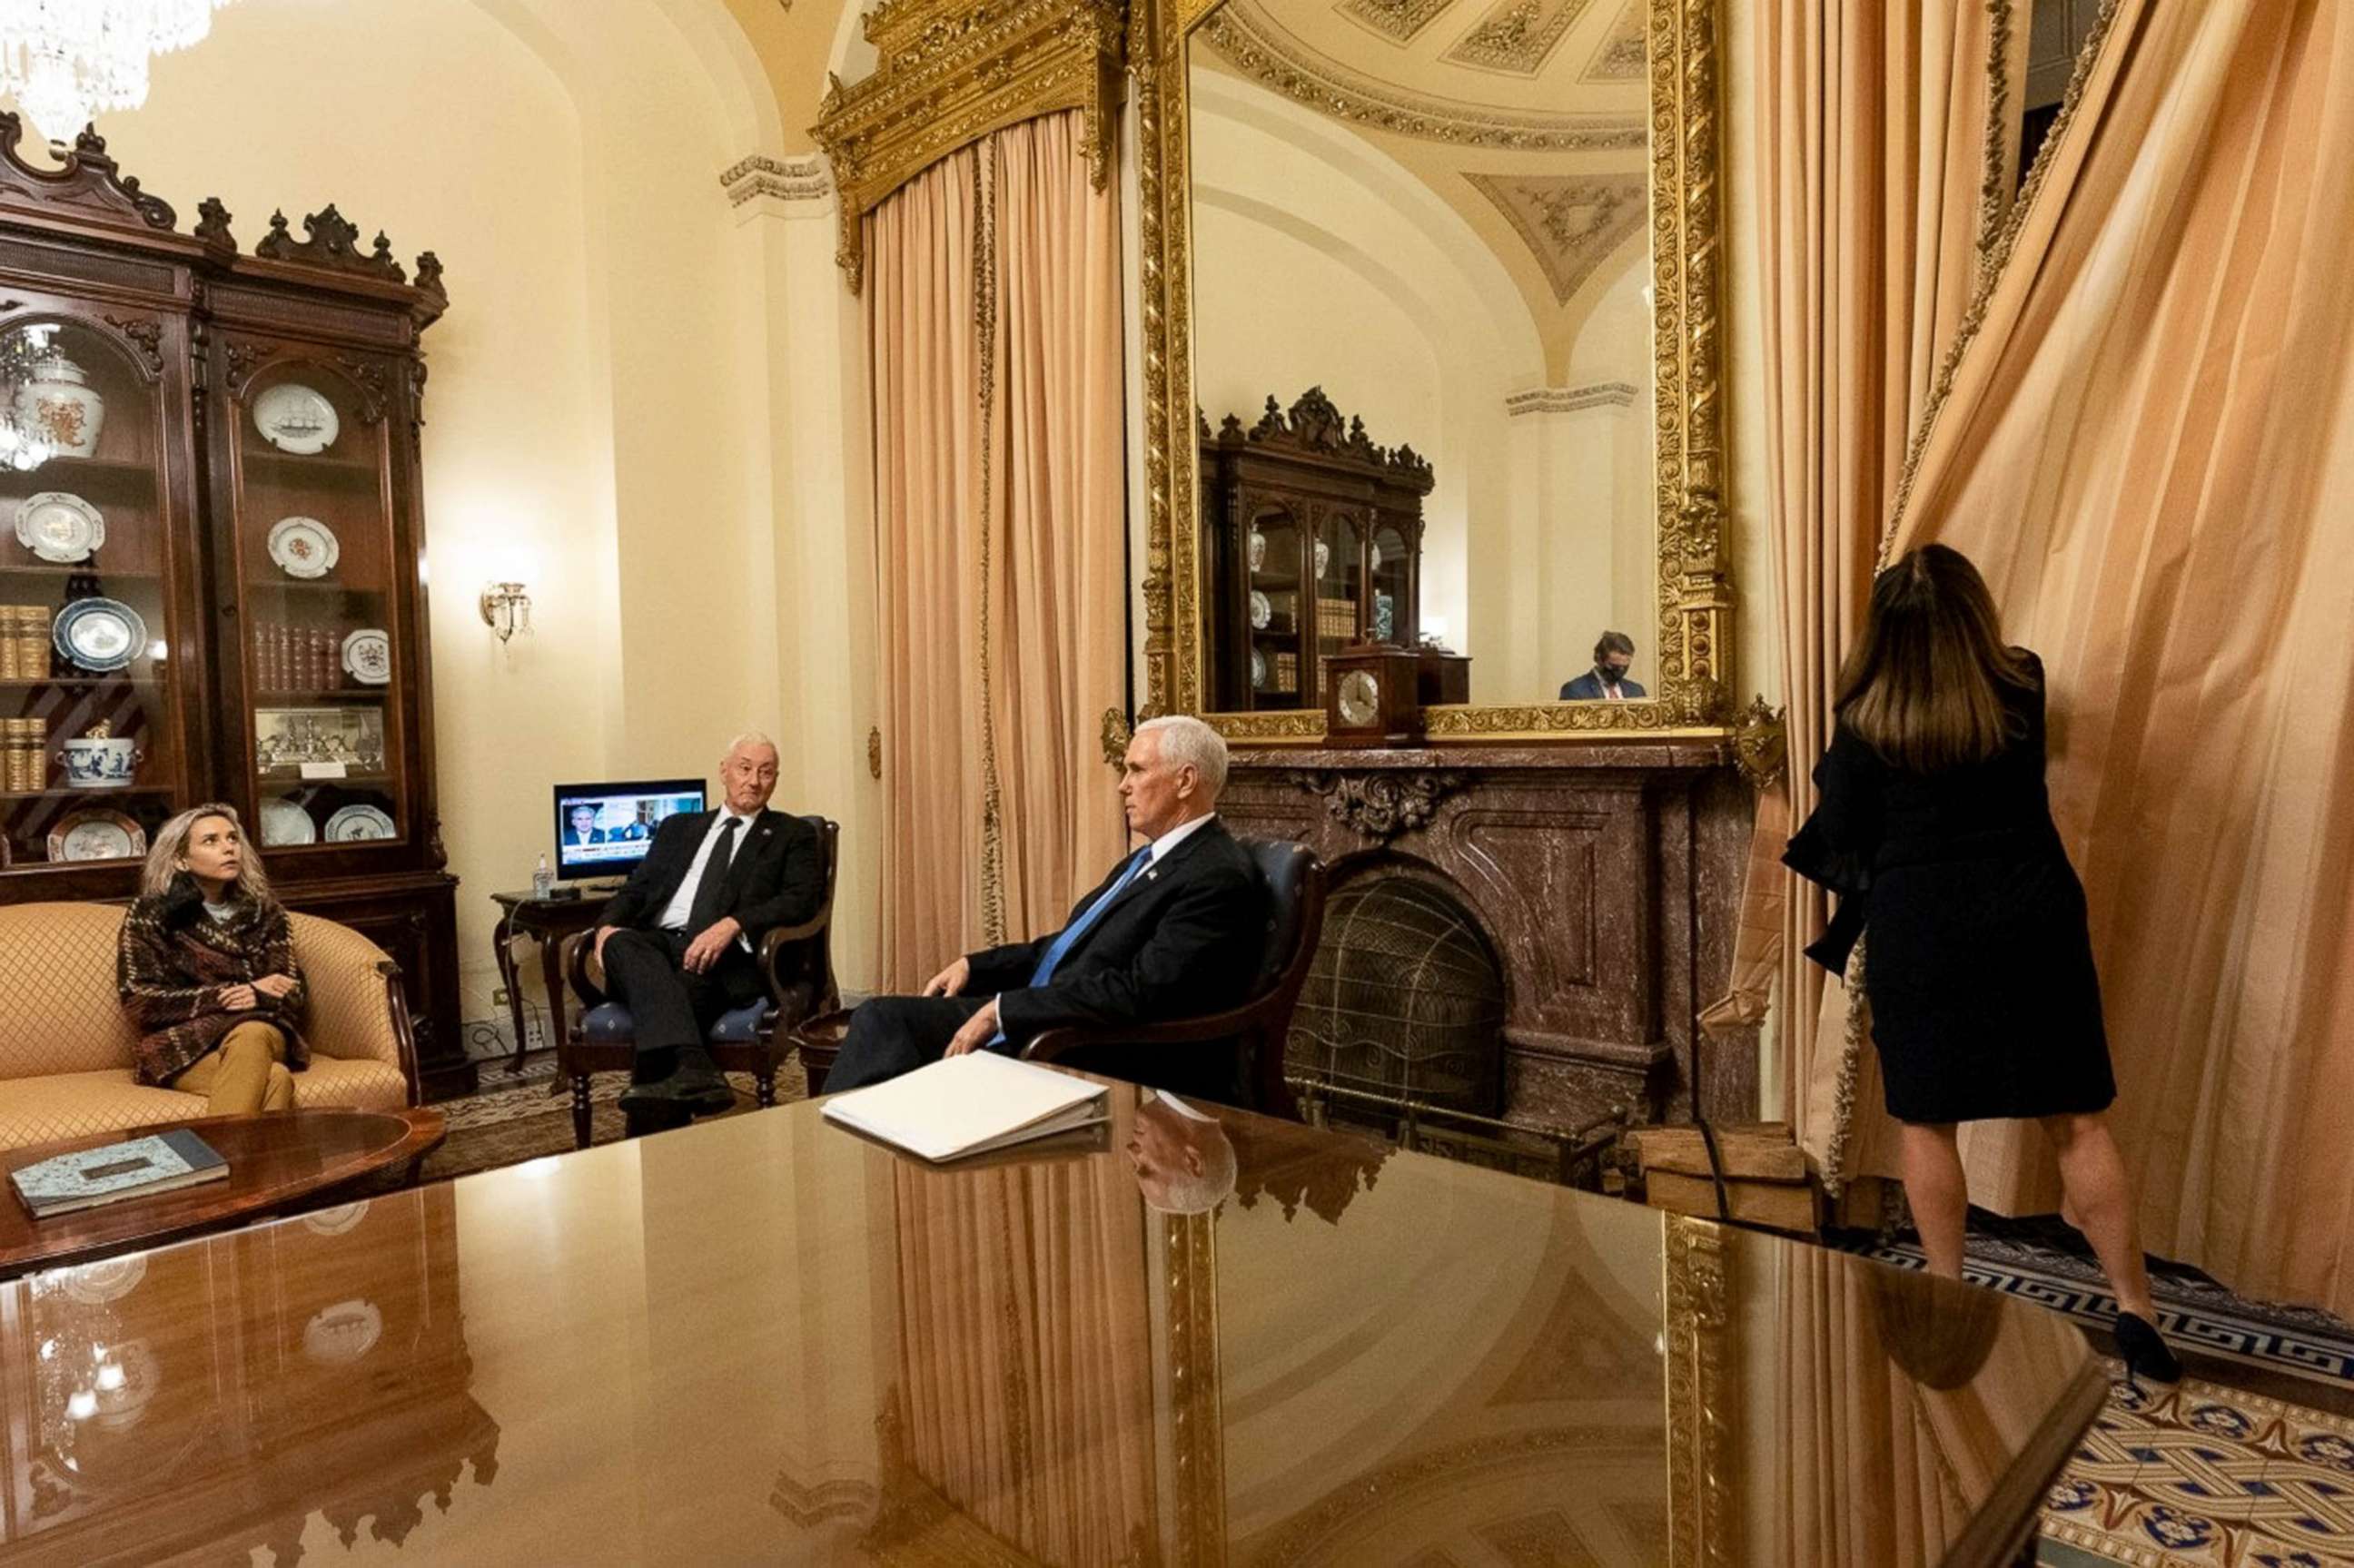 PHOTO:  Vice President Mike Pence sits with his daughter and brother while wife Karen draws the curtains in ceremonial room off Senate floor where he was evacuated to as Trump supporters attacked U.S. Capitol, Jan. 6, 2021,